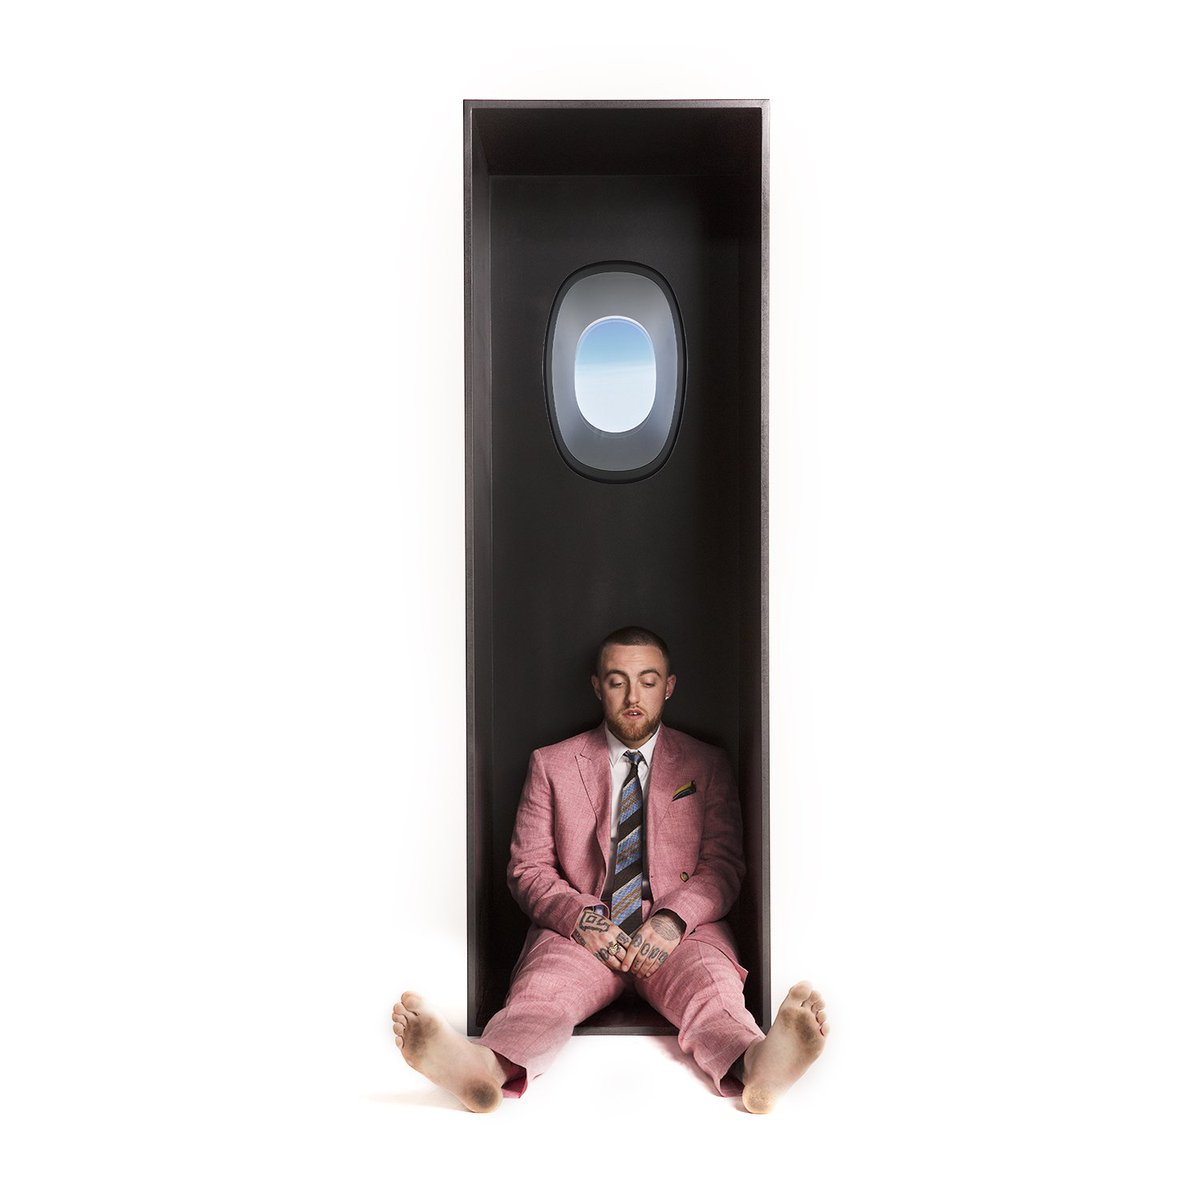 Swimming (10/10). If you've been around for a while, you knew this was coming, Swimming at number 1. Circles introduced me to Mac Miller, but Swimming sold me on Ma Miller. Swimming means so much to me as a person and as a fan of Mac Miller. When I listened to this album (1/5)